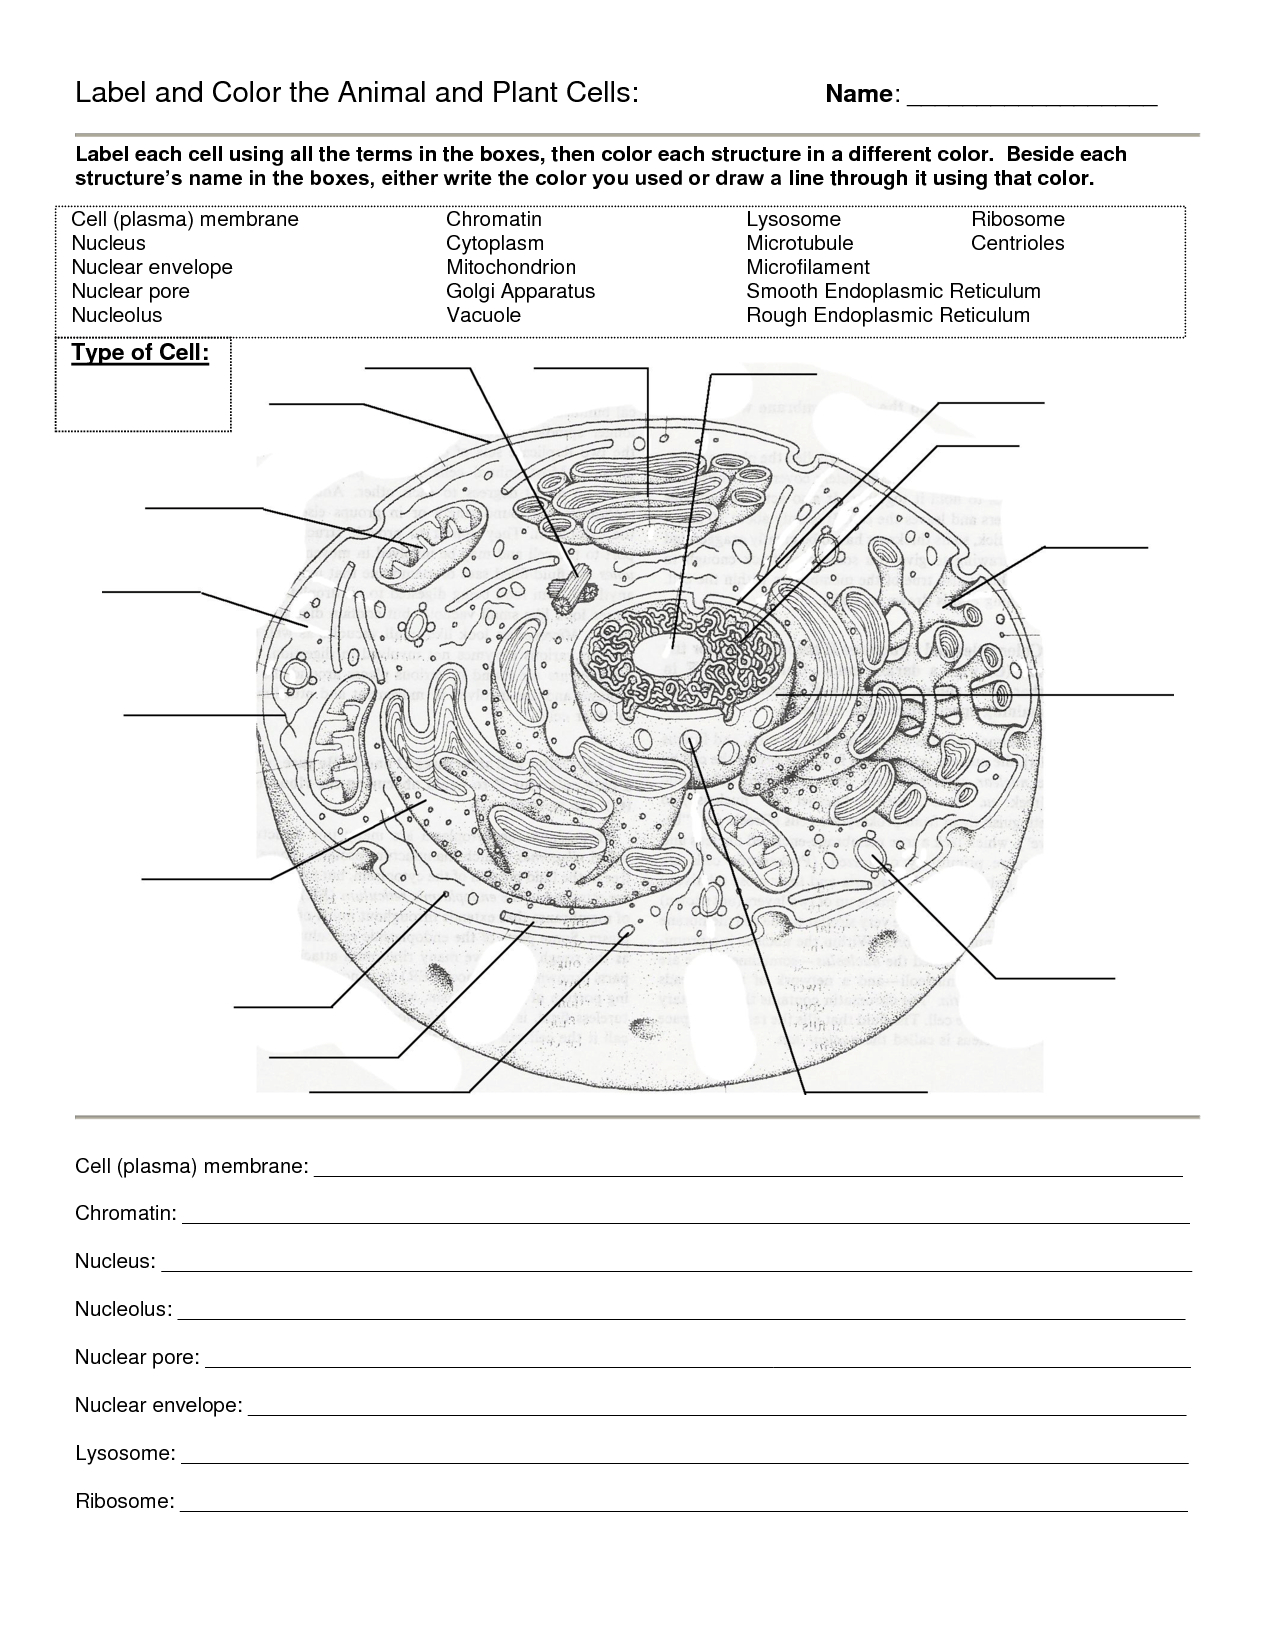 Worksheet : Animal Cell Coloring Worksheet Answers Animal And Plant - Free Printable Cell Worksheets